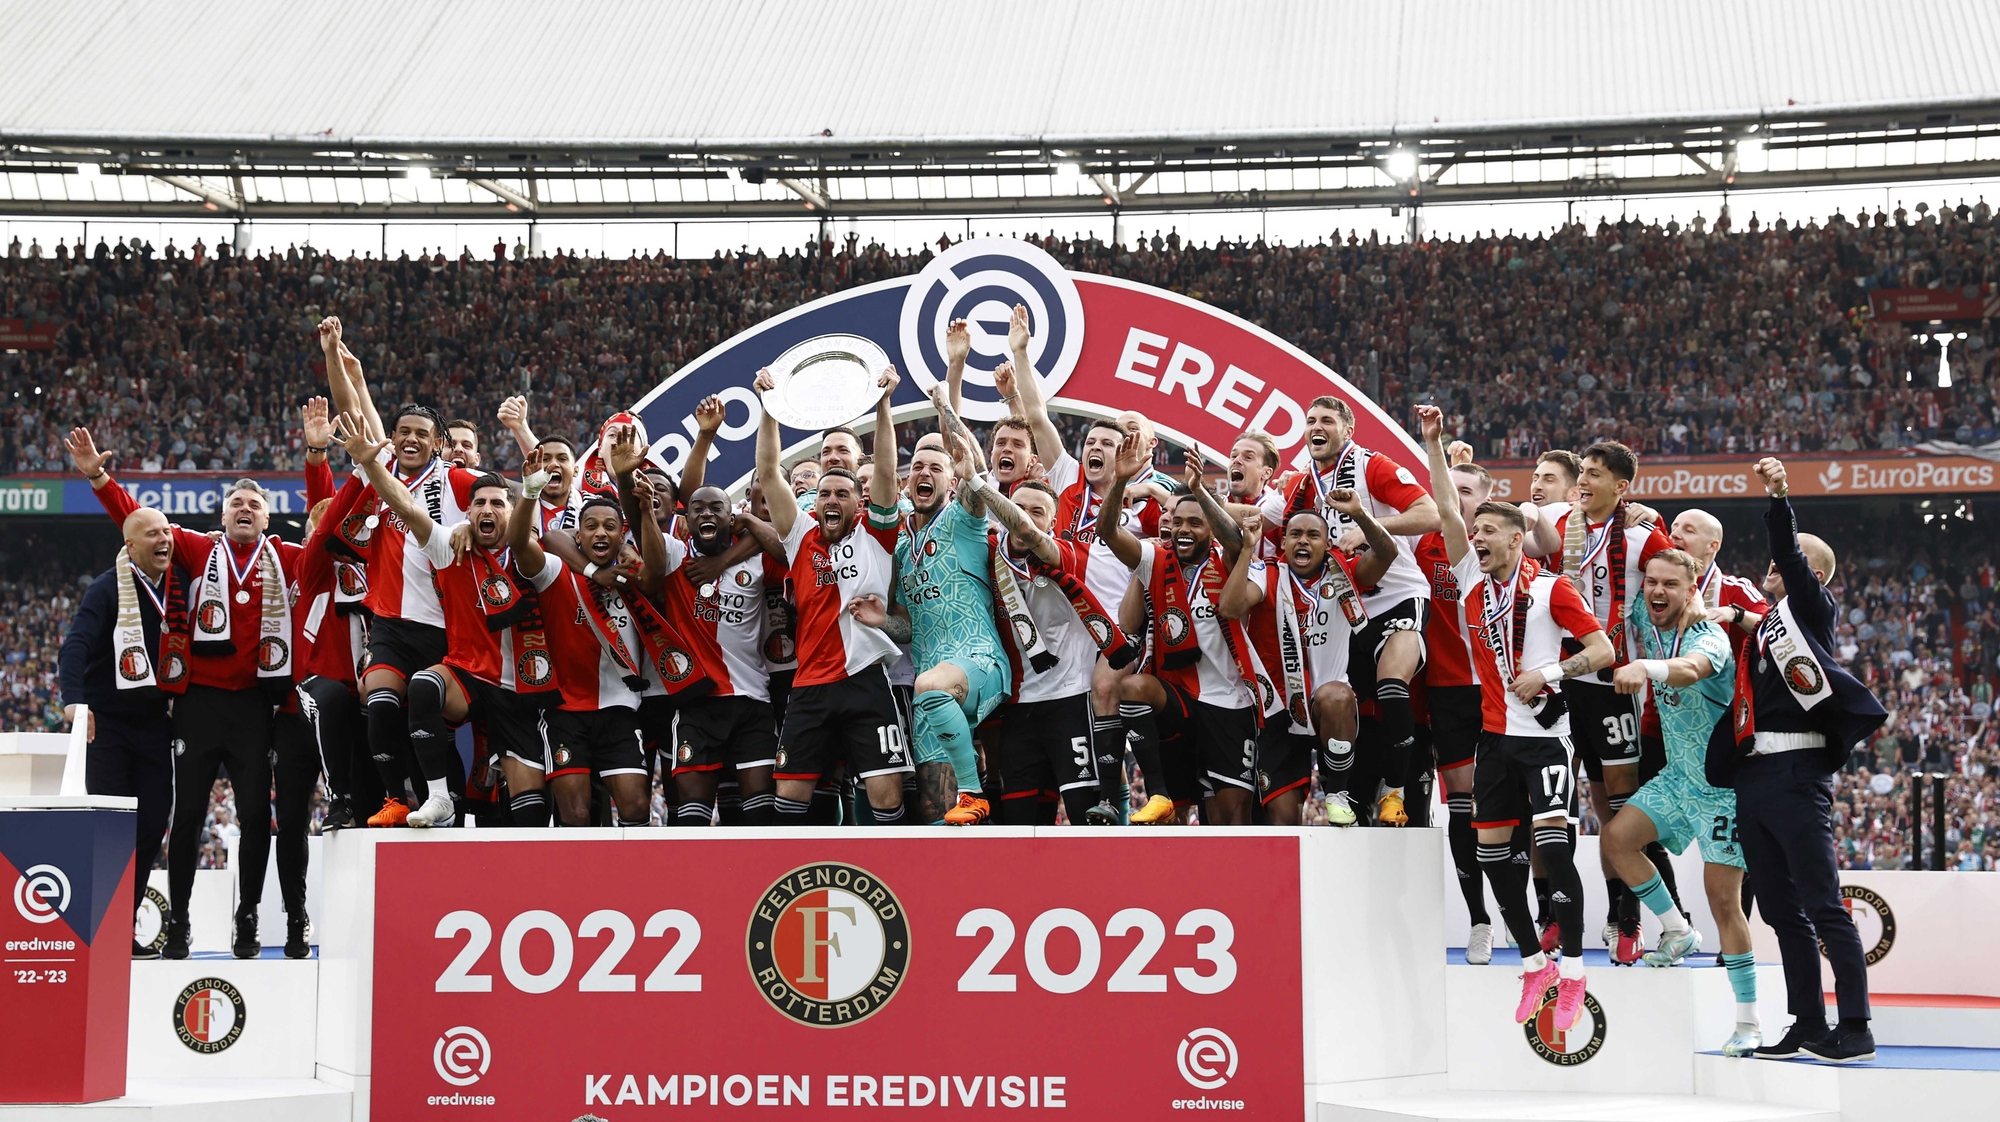 epa10628059 Feyenoord players celebrate after the Dutch Eredivisie match between Feyenoord Rotterdam and Go Ahead Eagles, in Rotterdam, Netherlands, 14 May 2023. Feyenoord sealed their 16th Dutch Eredivisie title with a 3-0 win.  EPA/MAURICE VAN STEEN